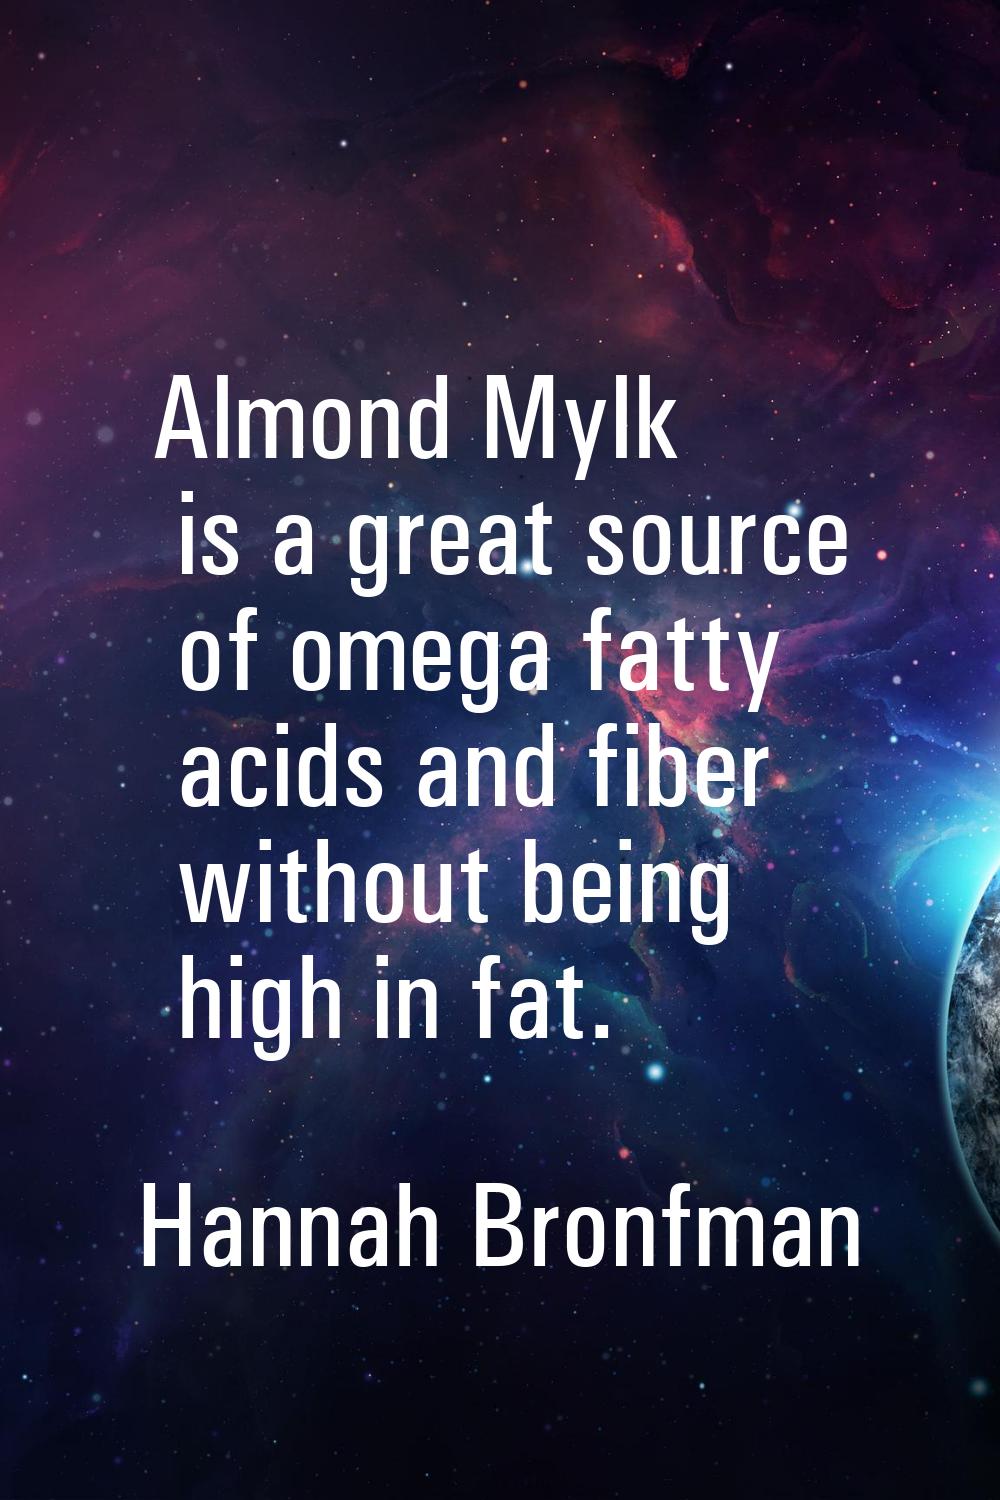 Almond Mylk is a great source of omega fatty acids and fiber without being high in fat.